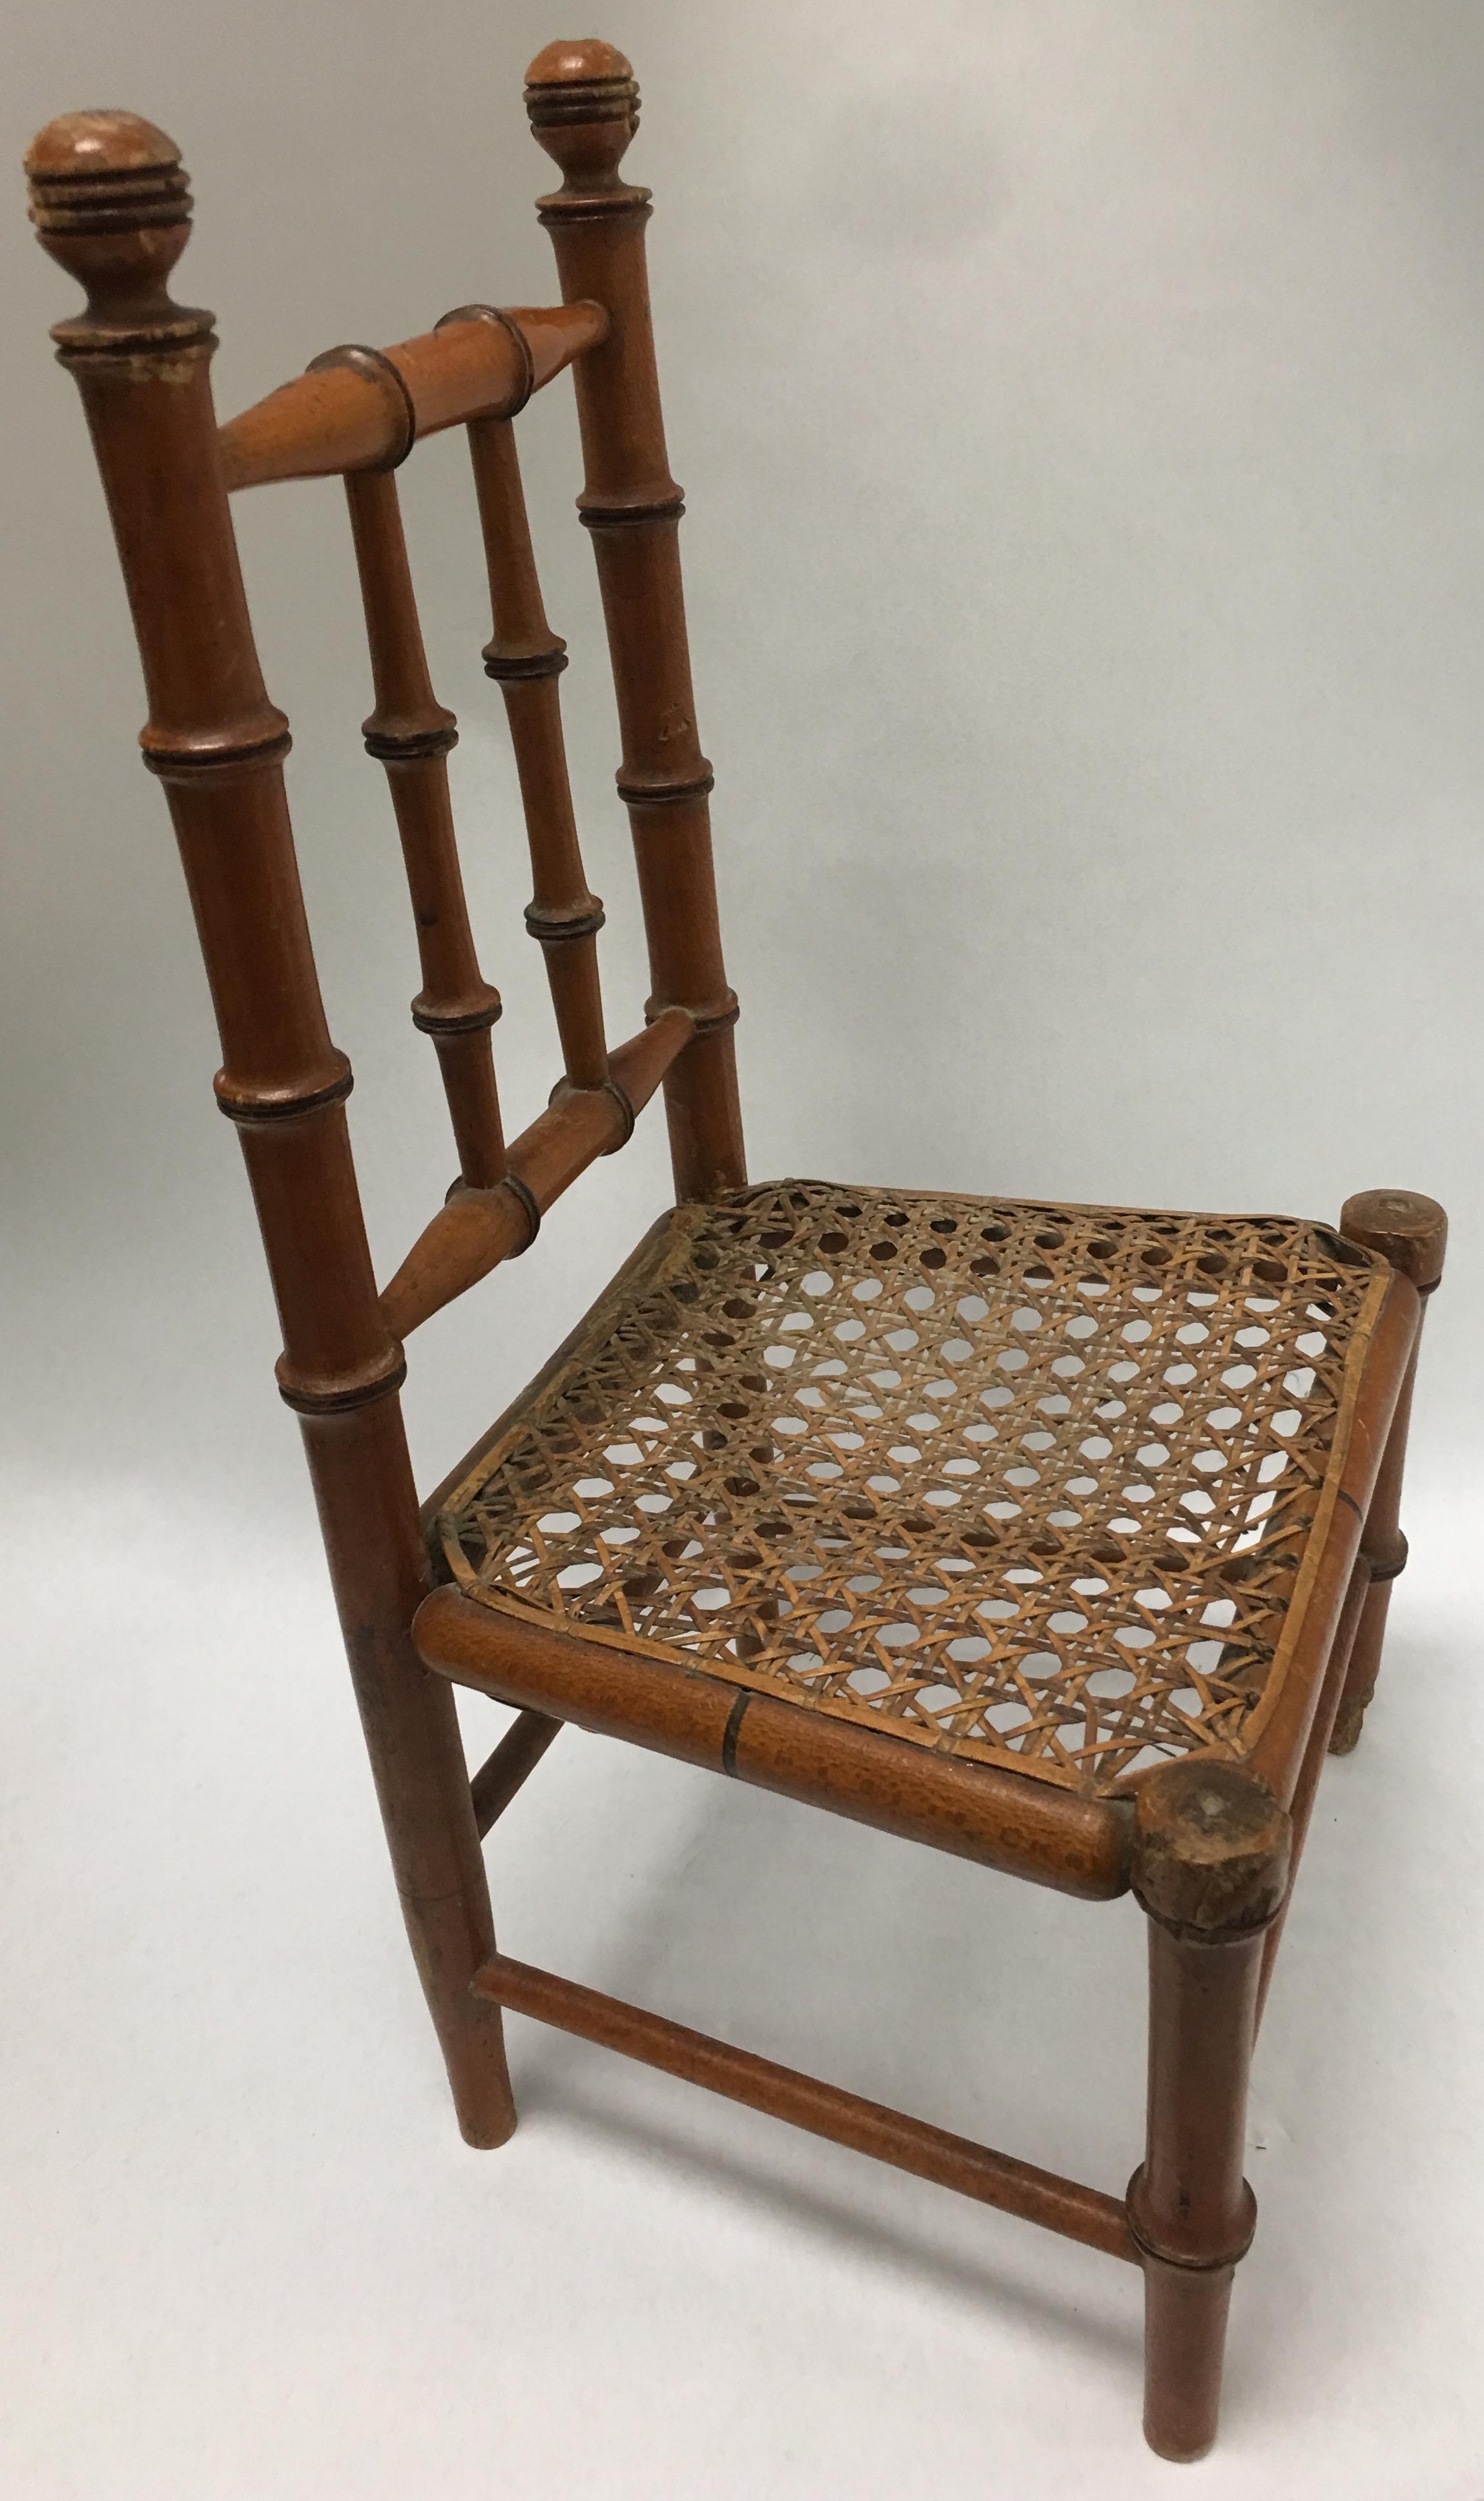 19th century French miniature fruitwood faux bamboo carved wood chair with original caned seat. Seat is 6